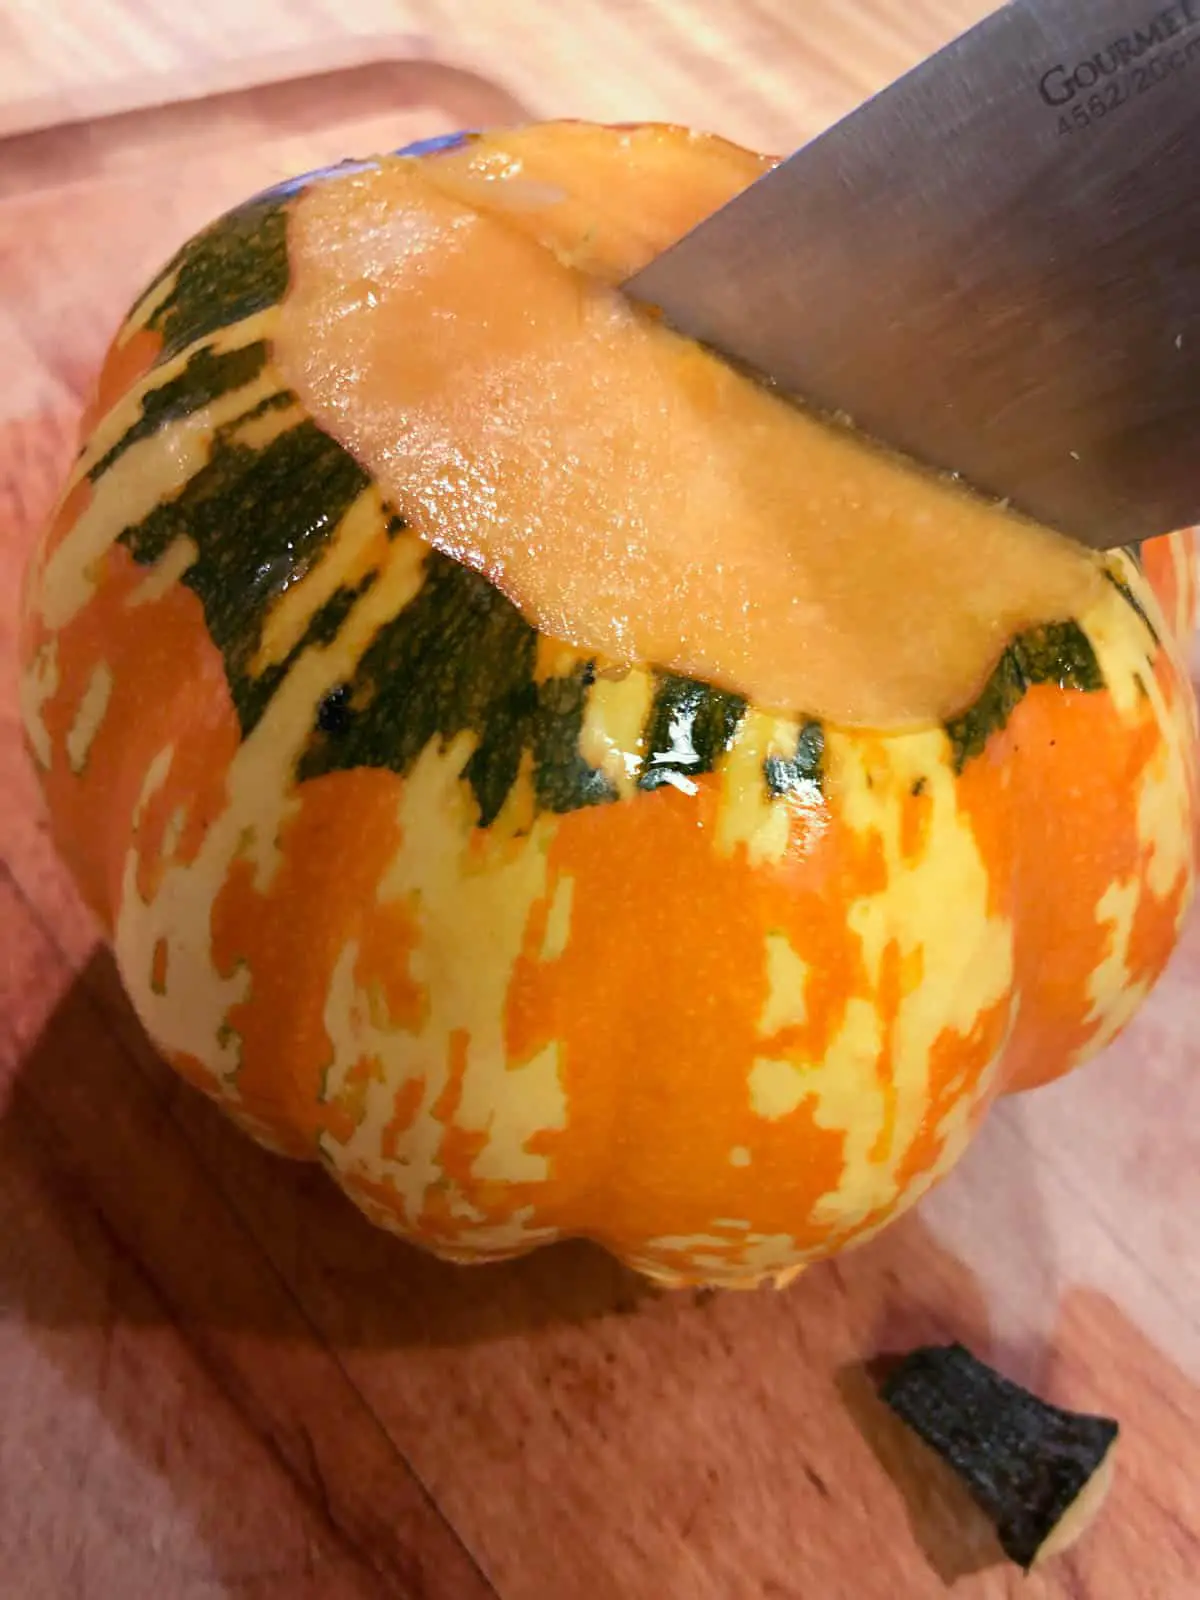 Carnival squash with the top cut off and a knife sticking out of it.